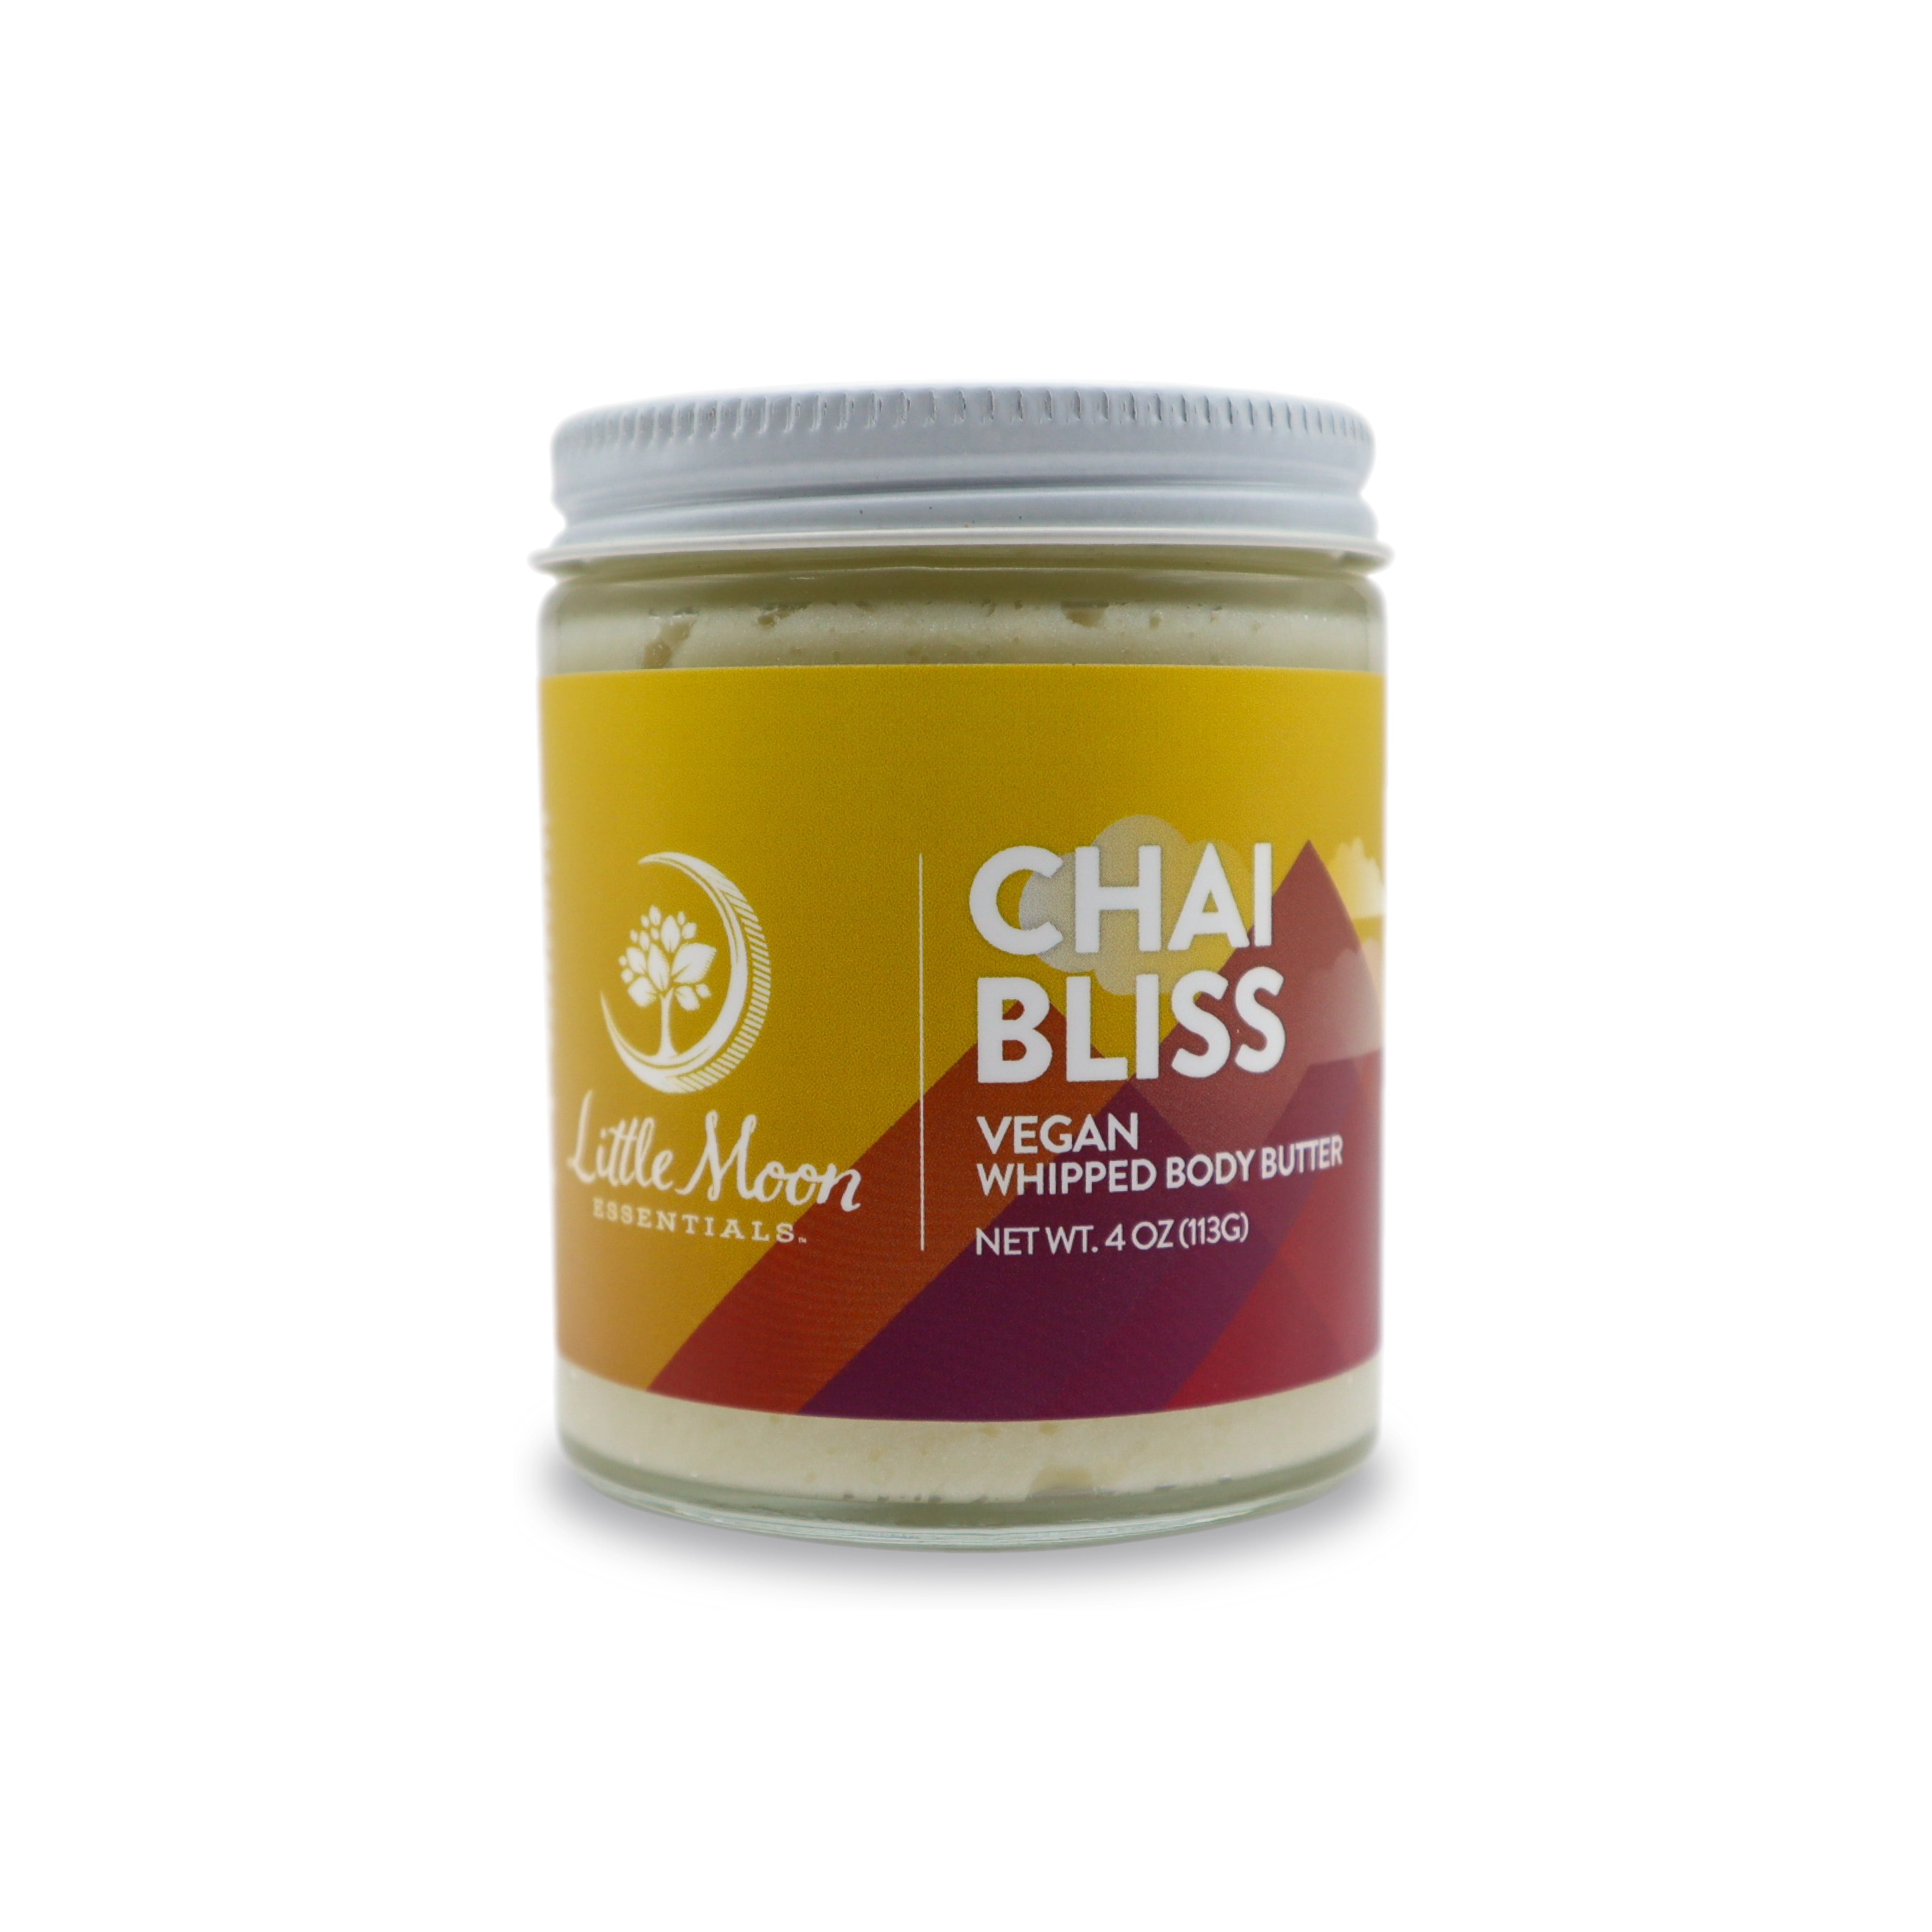 *LIMITED EDITION* Chai Bliss Body Butter - Little Moon Essentials